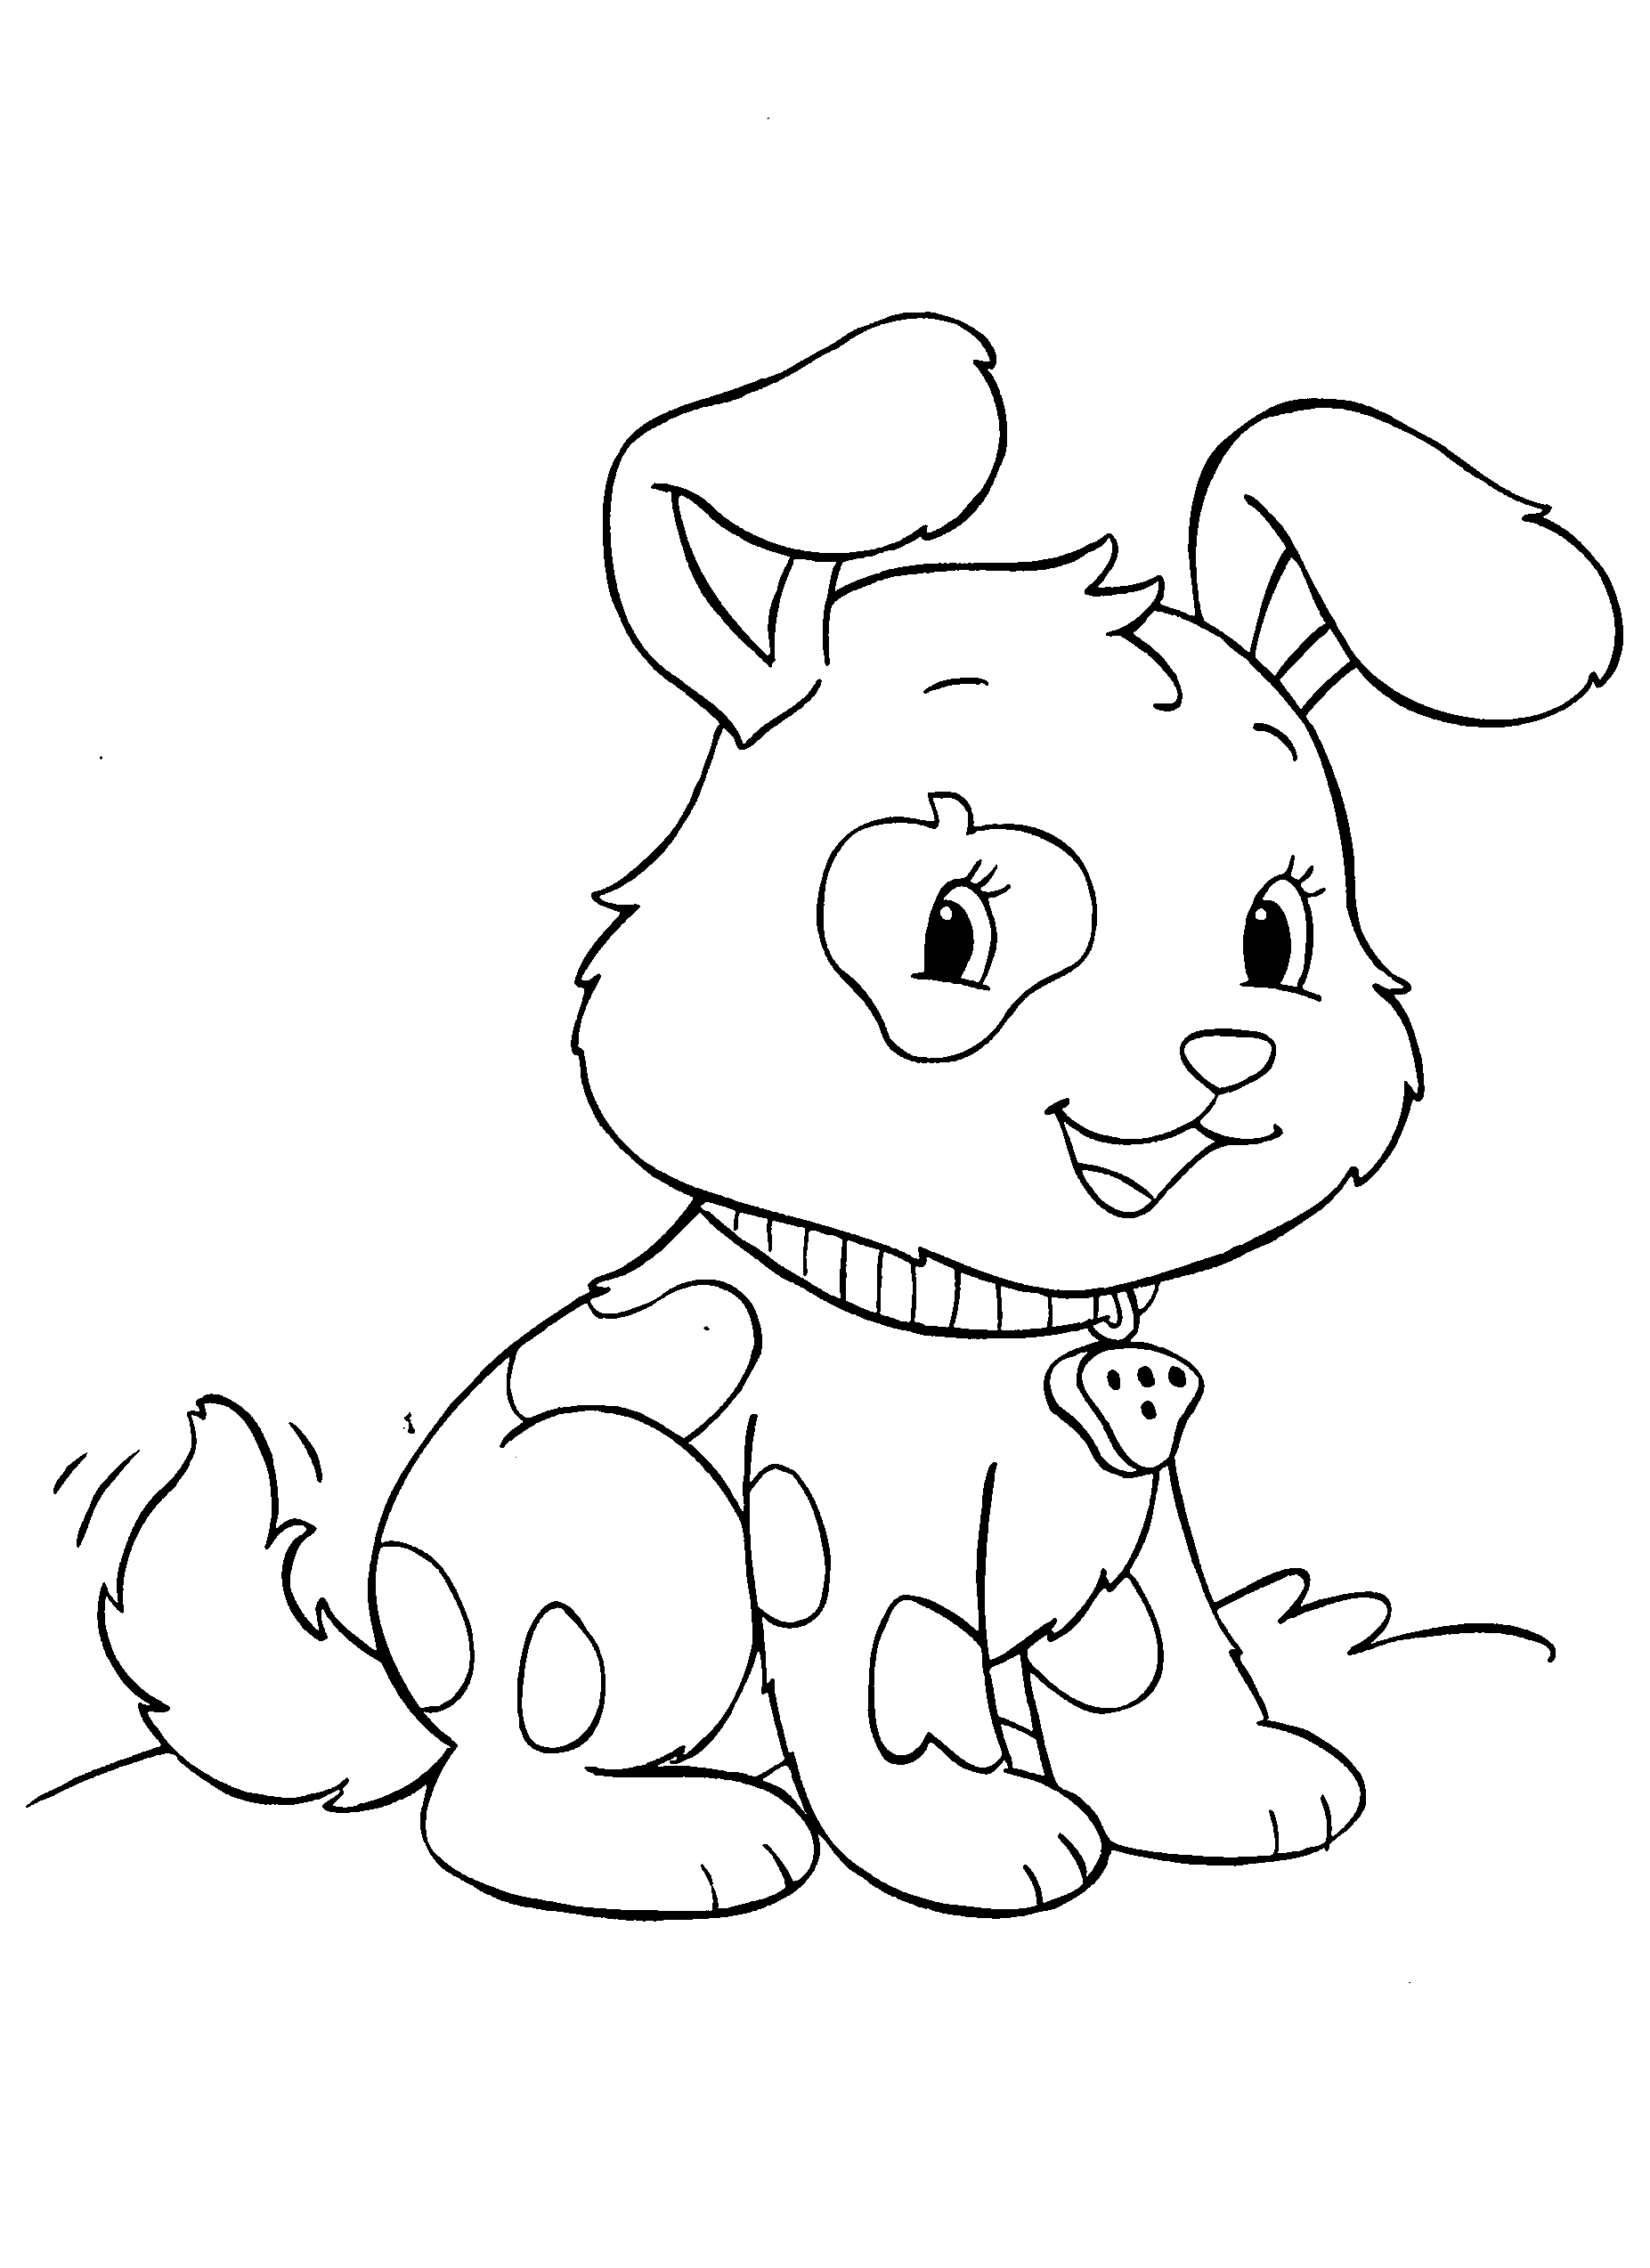 Cute Puppy Pictures To Print - Coloring Pages for Kids and for Adults